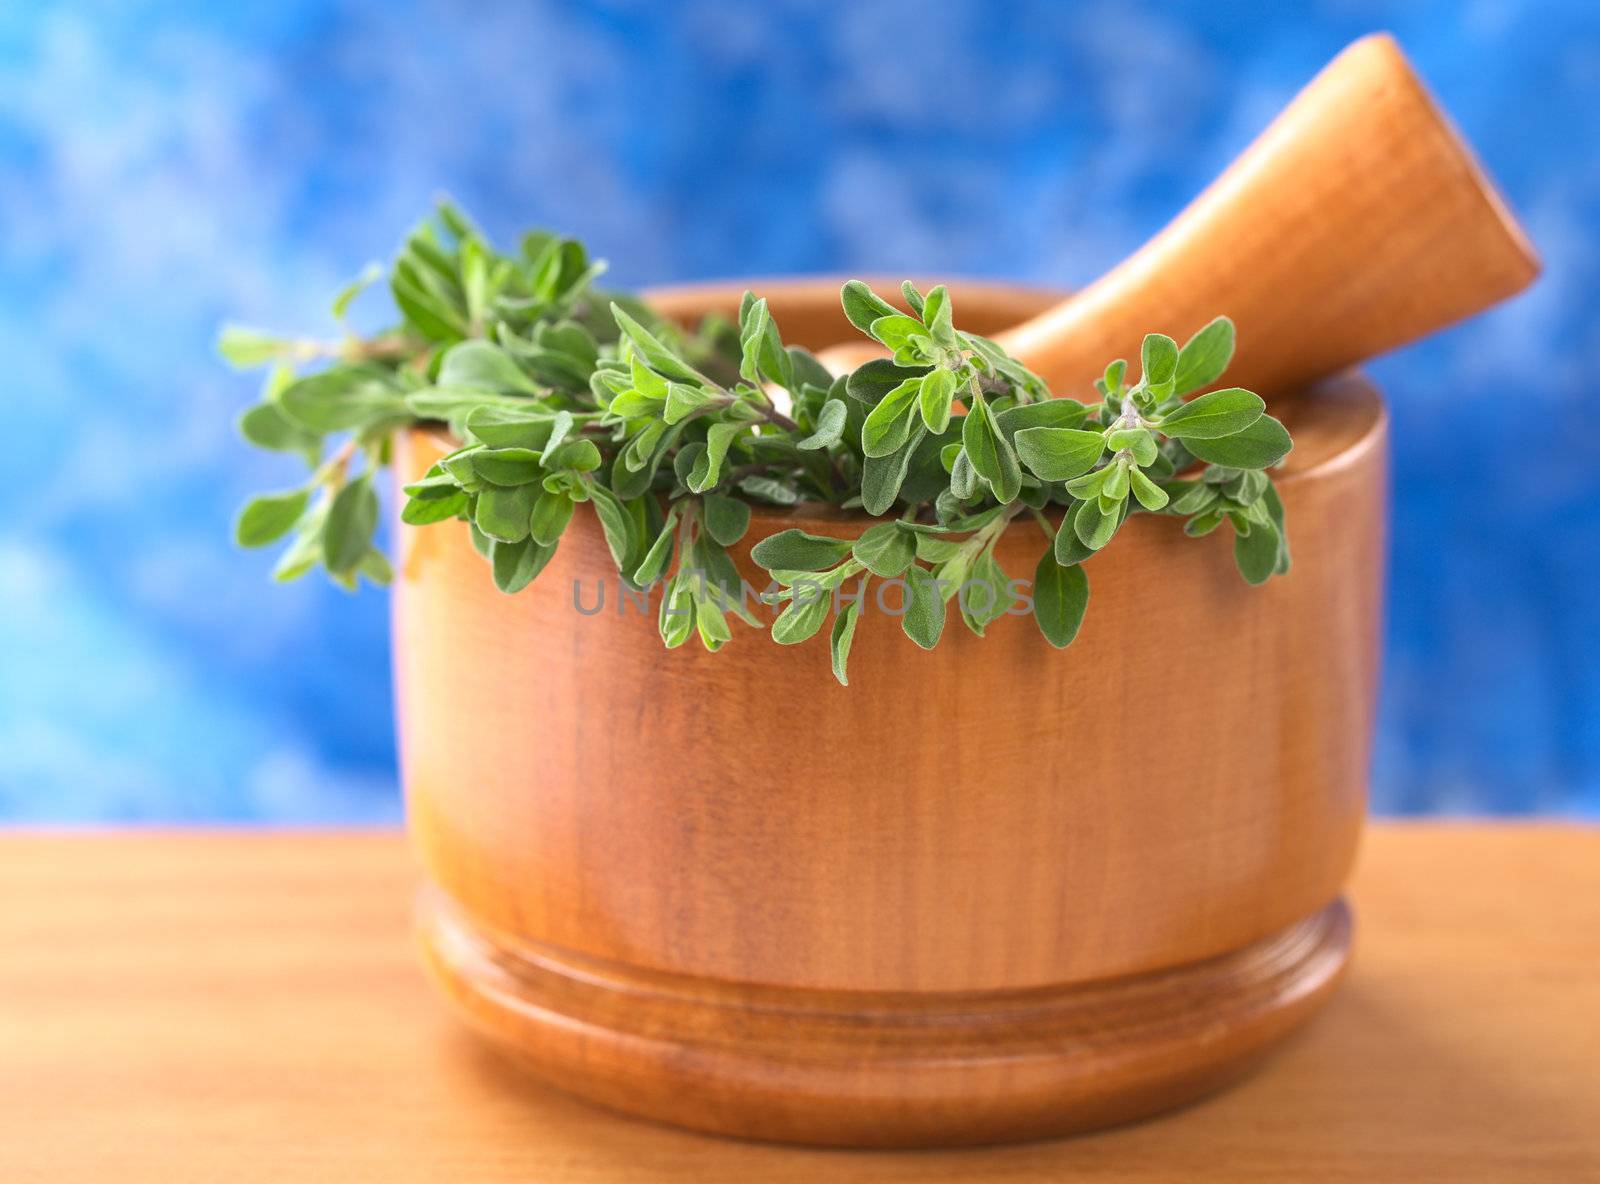 Fresh marjoram in wooden mortar with wooden pestle with a blue background (Selective Focus, Focus on the leaves in the front)